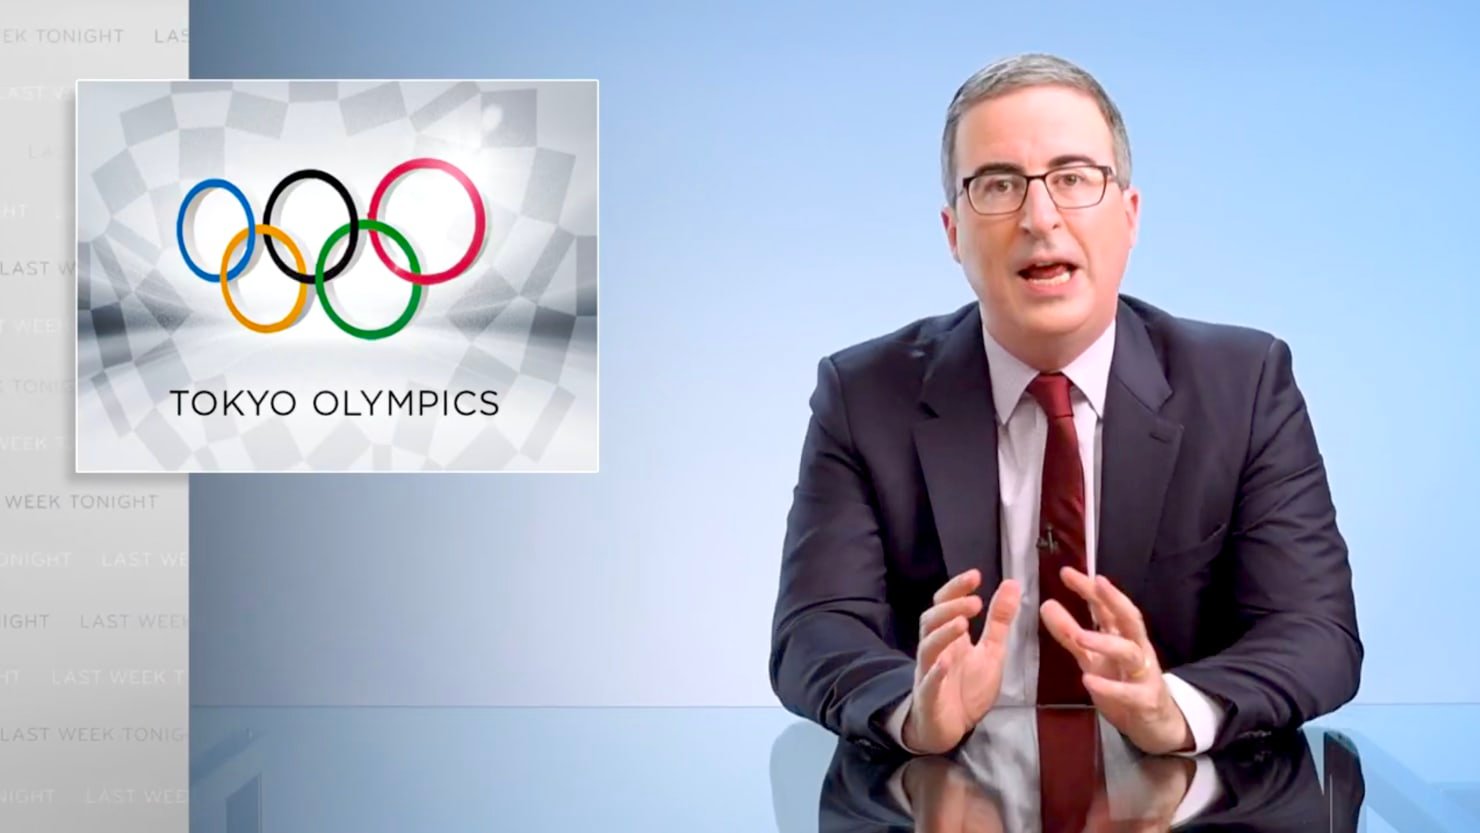 John Oliver Makes the Case for Canceling the 2021 Tokyo Olympics